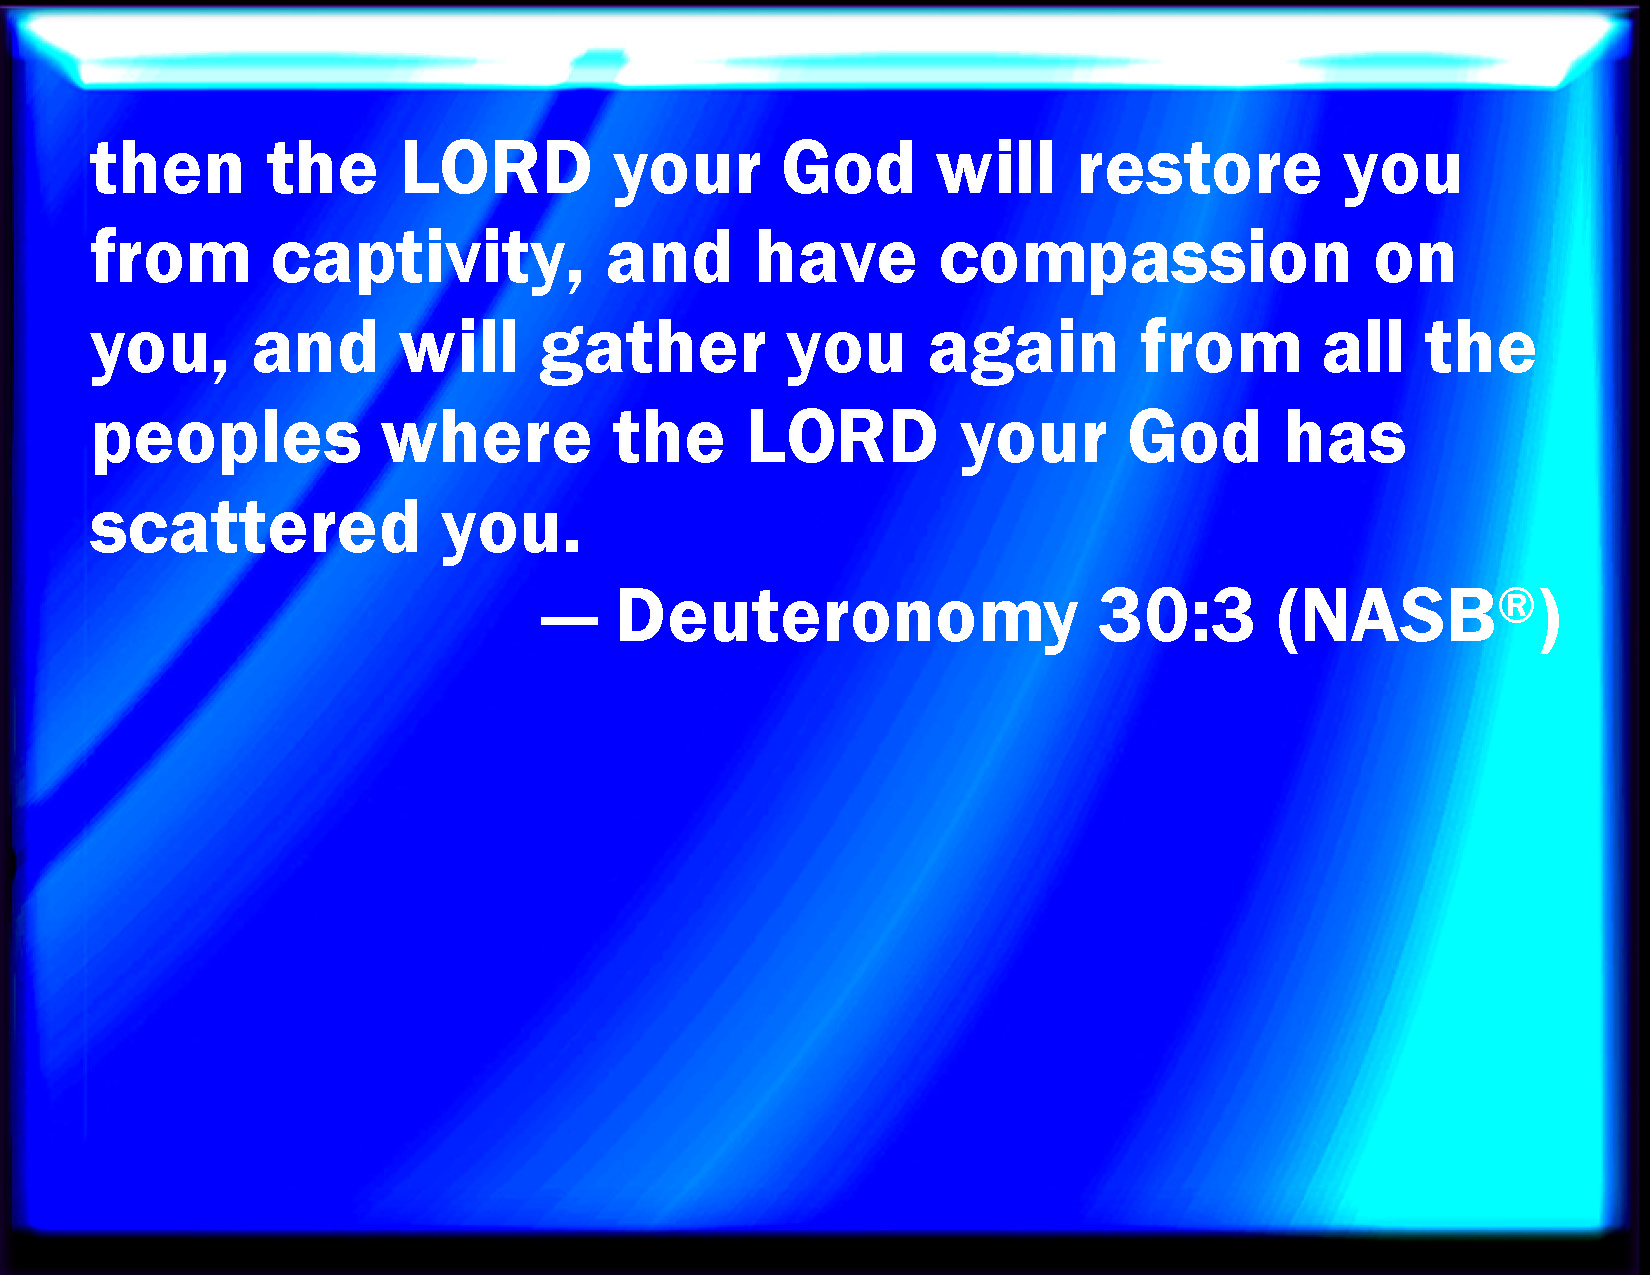 Deuteronomy 30:3 That then the LORD your God will turn your captivity